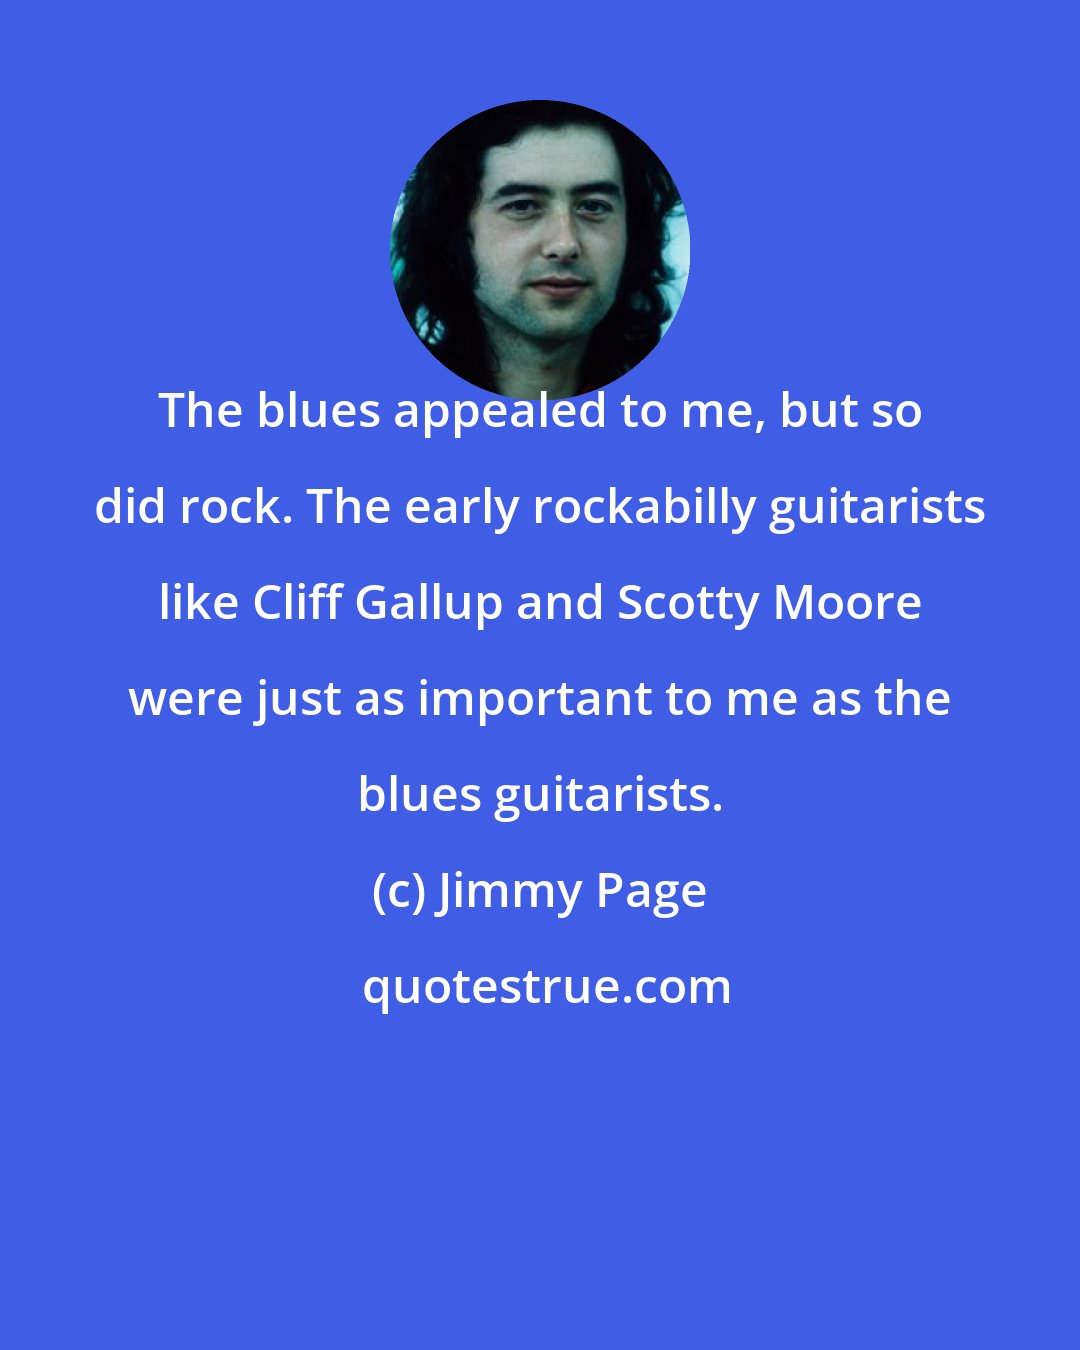 Jimmy Page: The blues appealed to me, but so did rock. The early rockabilly guitarists like Cliff Gallup and Scotty Moore were just as important to me as the blues guitarists.